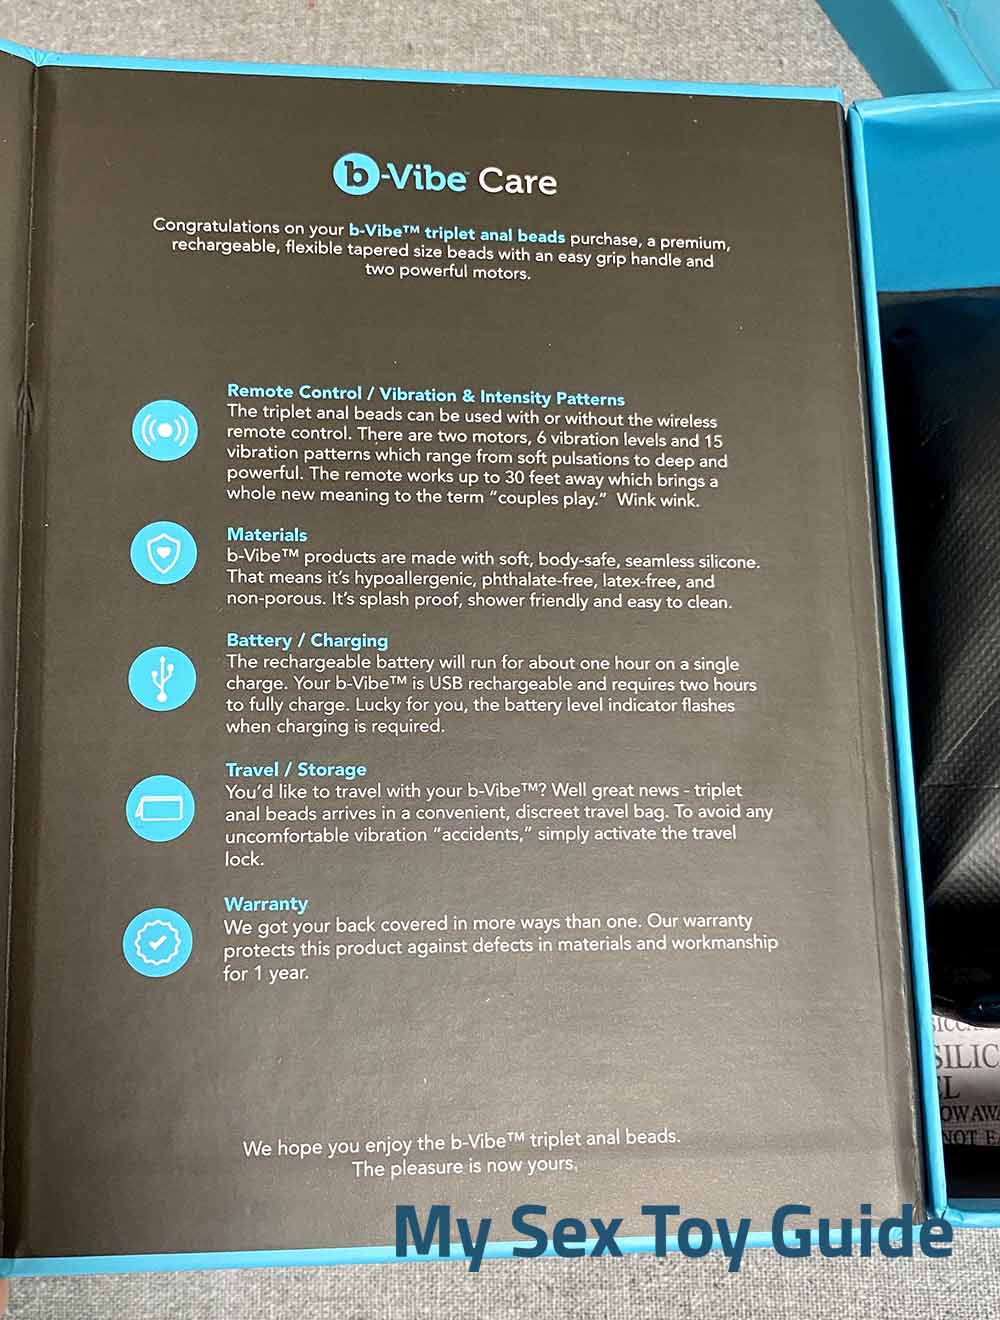 The material care guide on the box